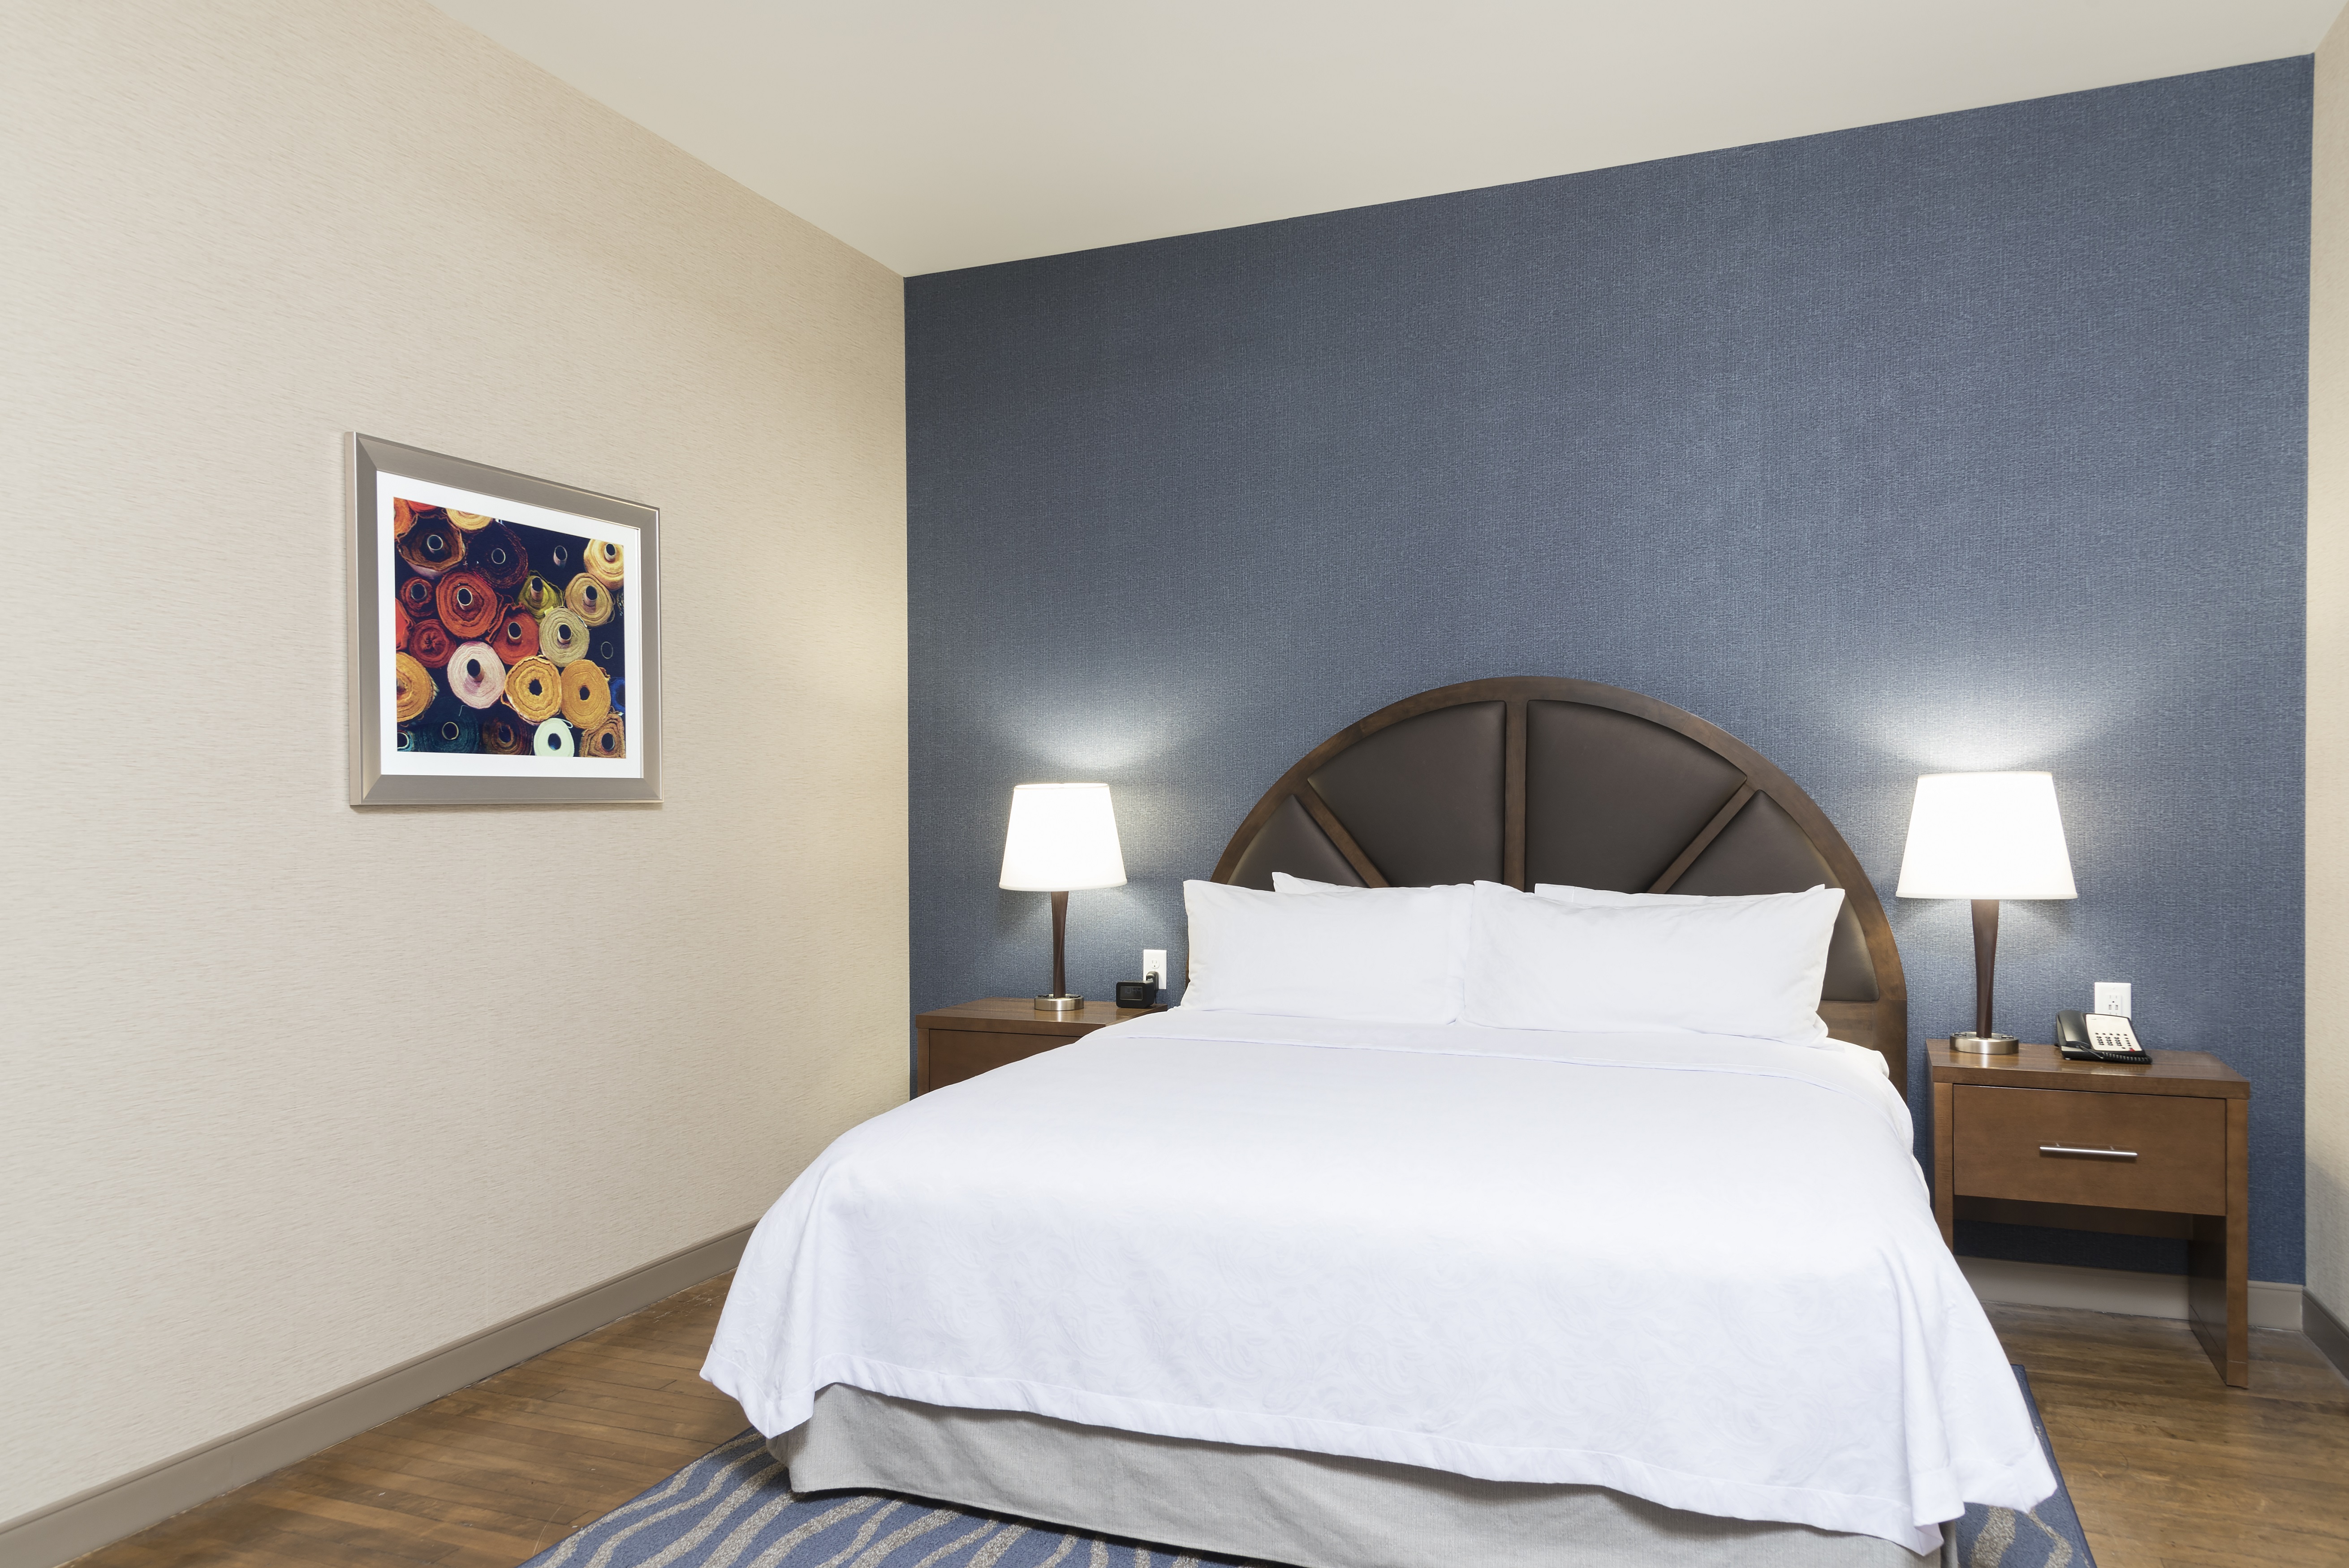 Wall Art and Queen Bed Between Two Illuminated Lamps on Bedside Tables in Suite